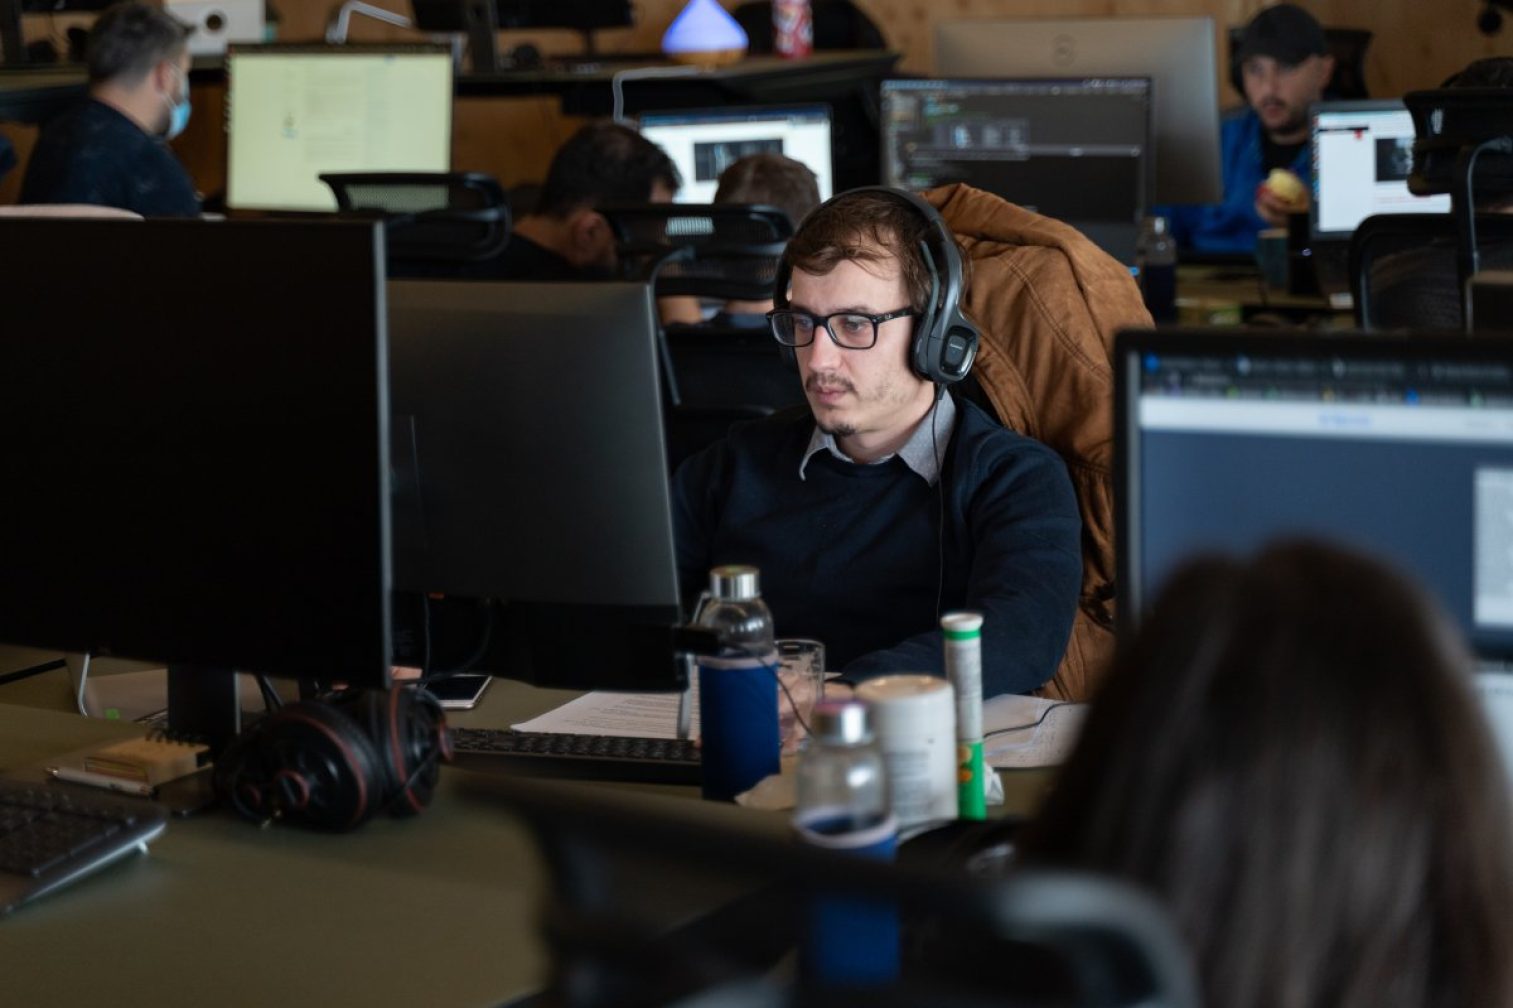 Man wearing glasses and headphone working from office desk.